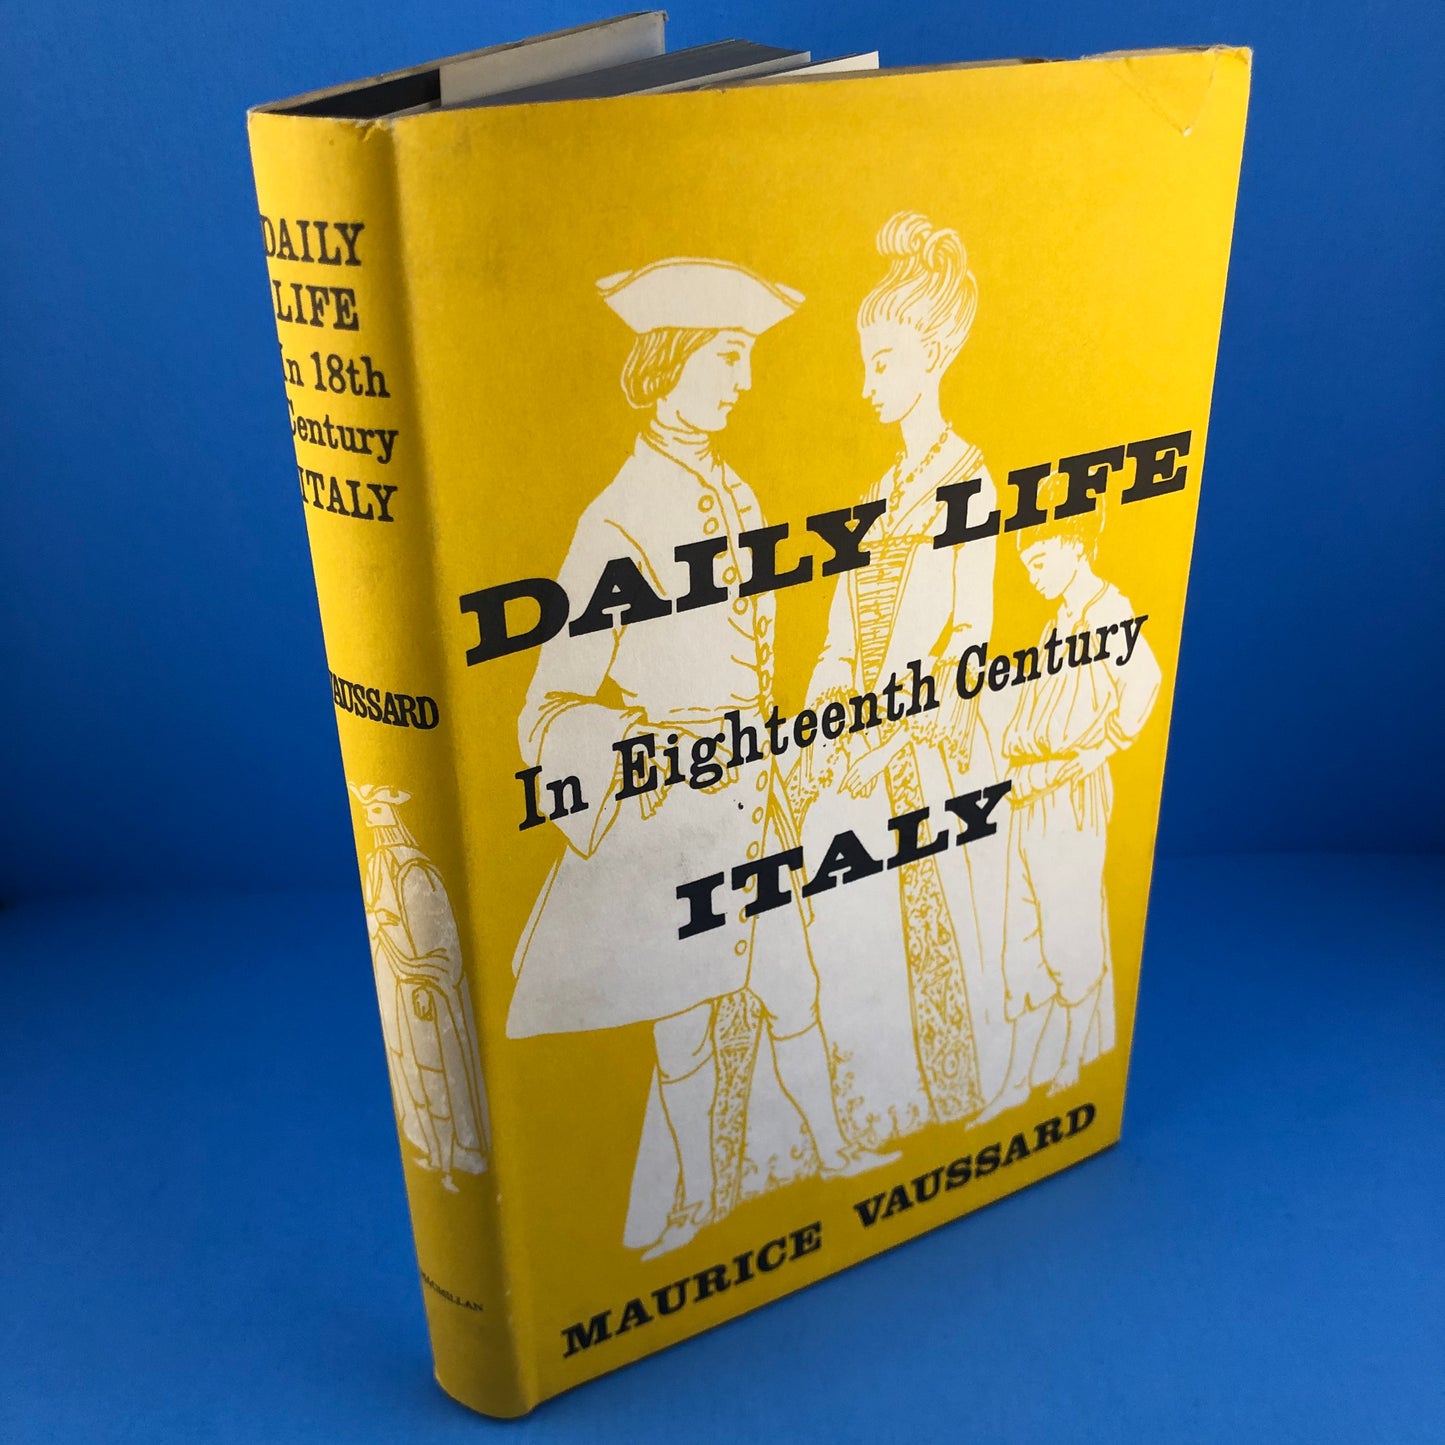 Daily Life in Eighteenth Century Italy Default Title